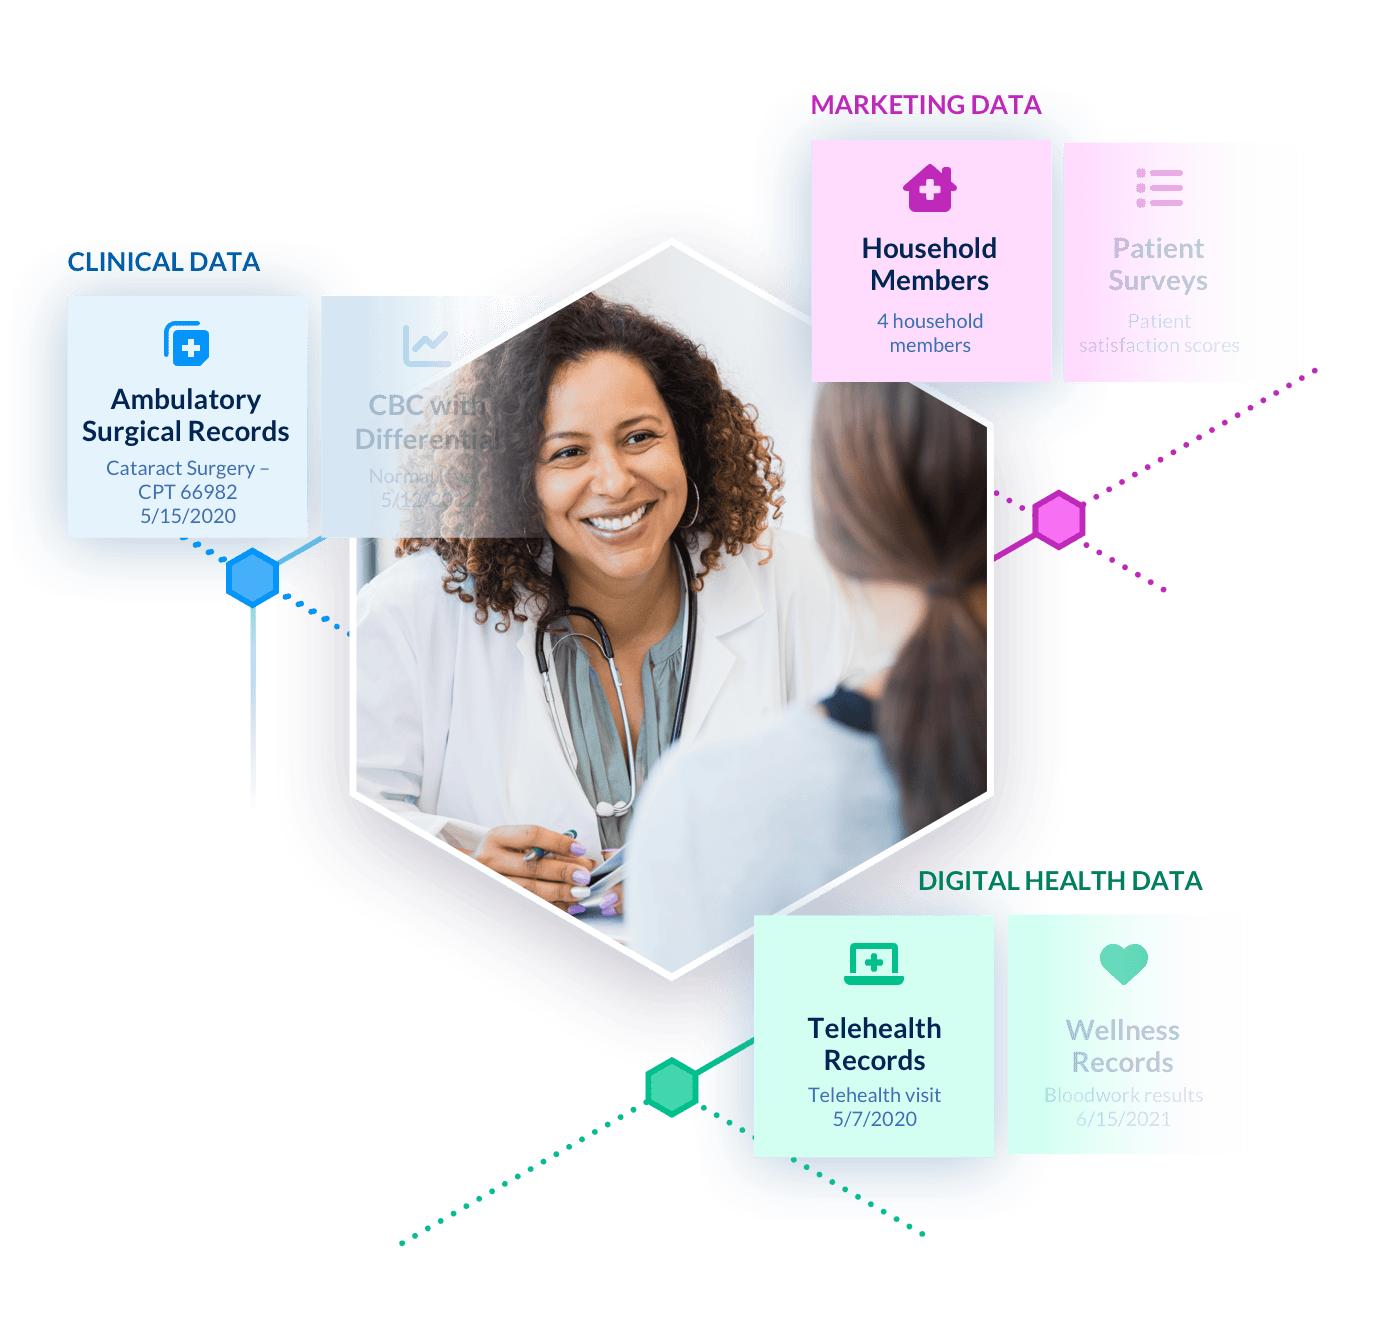 doctor speaking to patient image in the center surrounded by cards with text; marketing data, household members 4 household members. Digital health data, telehealth records, telehealth visit 5/7/2020. Clinical data, ambulatory surgical records, cataract surgery- CPT 66982 5/15/2020